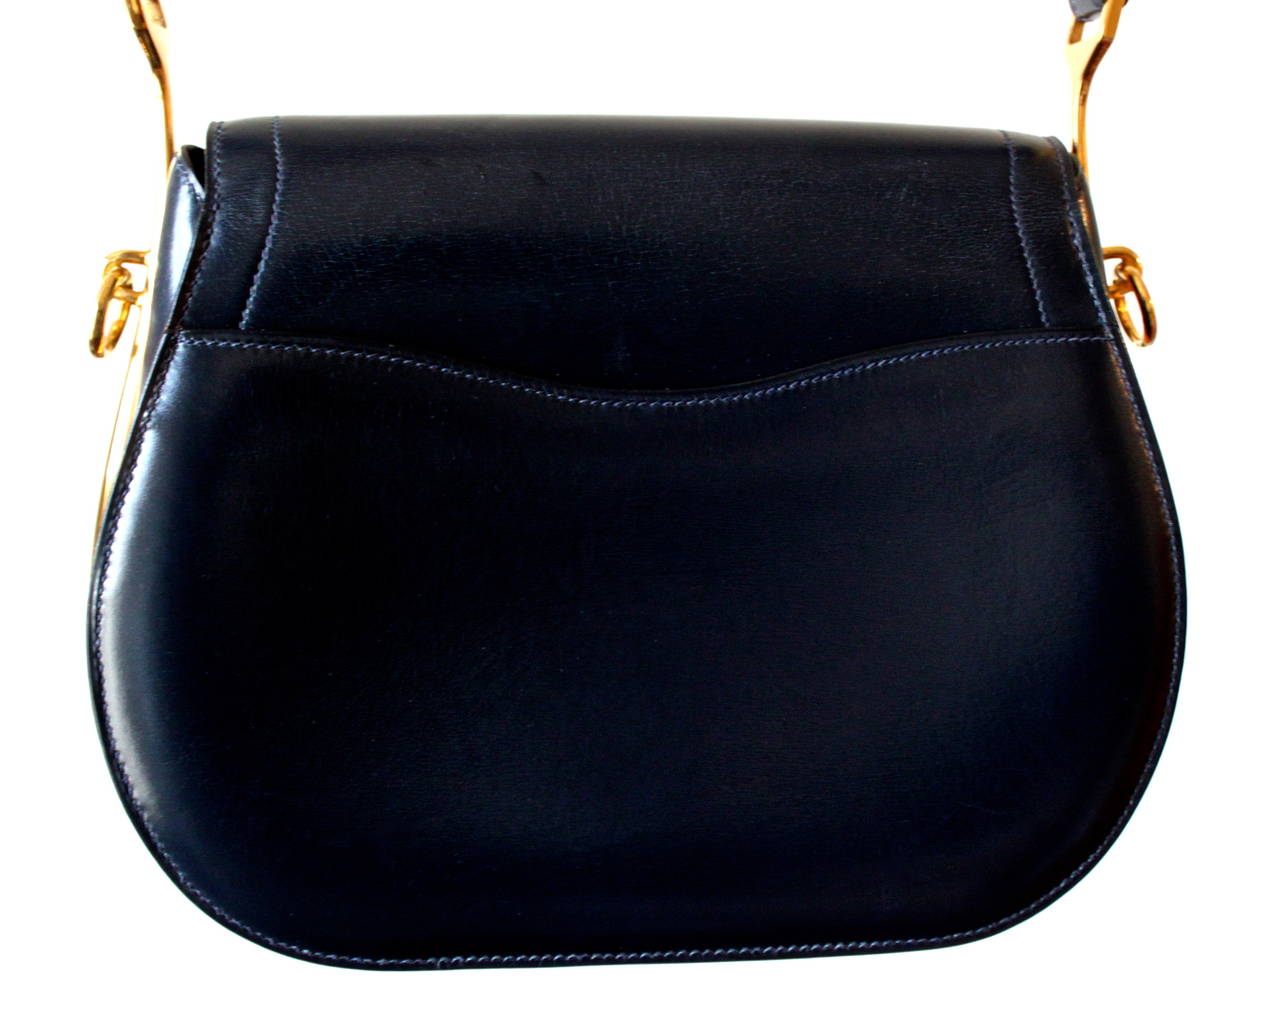 Very rare navy blue leather Passe-Guide bagwith gilt hardware designed by Hermes. Measures approximately: 28 cm (11